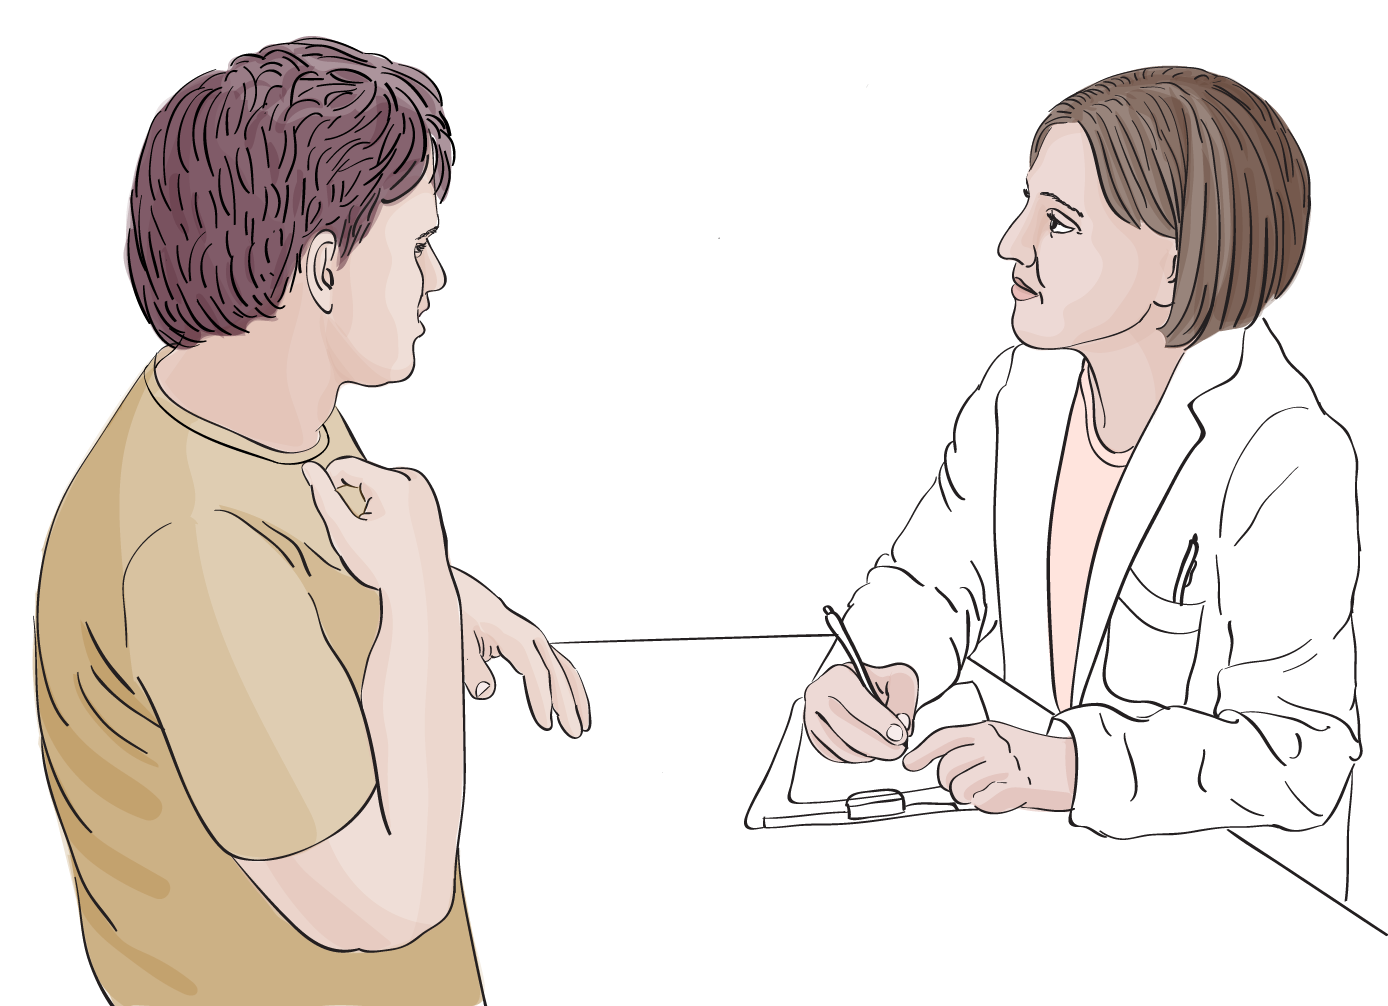 A health care provider sits next to a patient and listens to what the patient has to say while taking notes. They are both sitting at a table in the doctor's office.